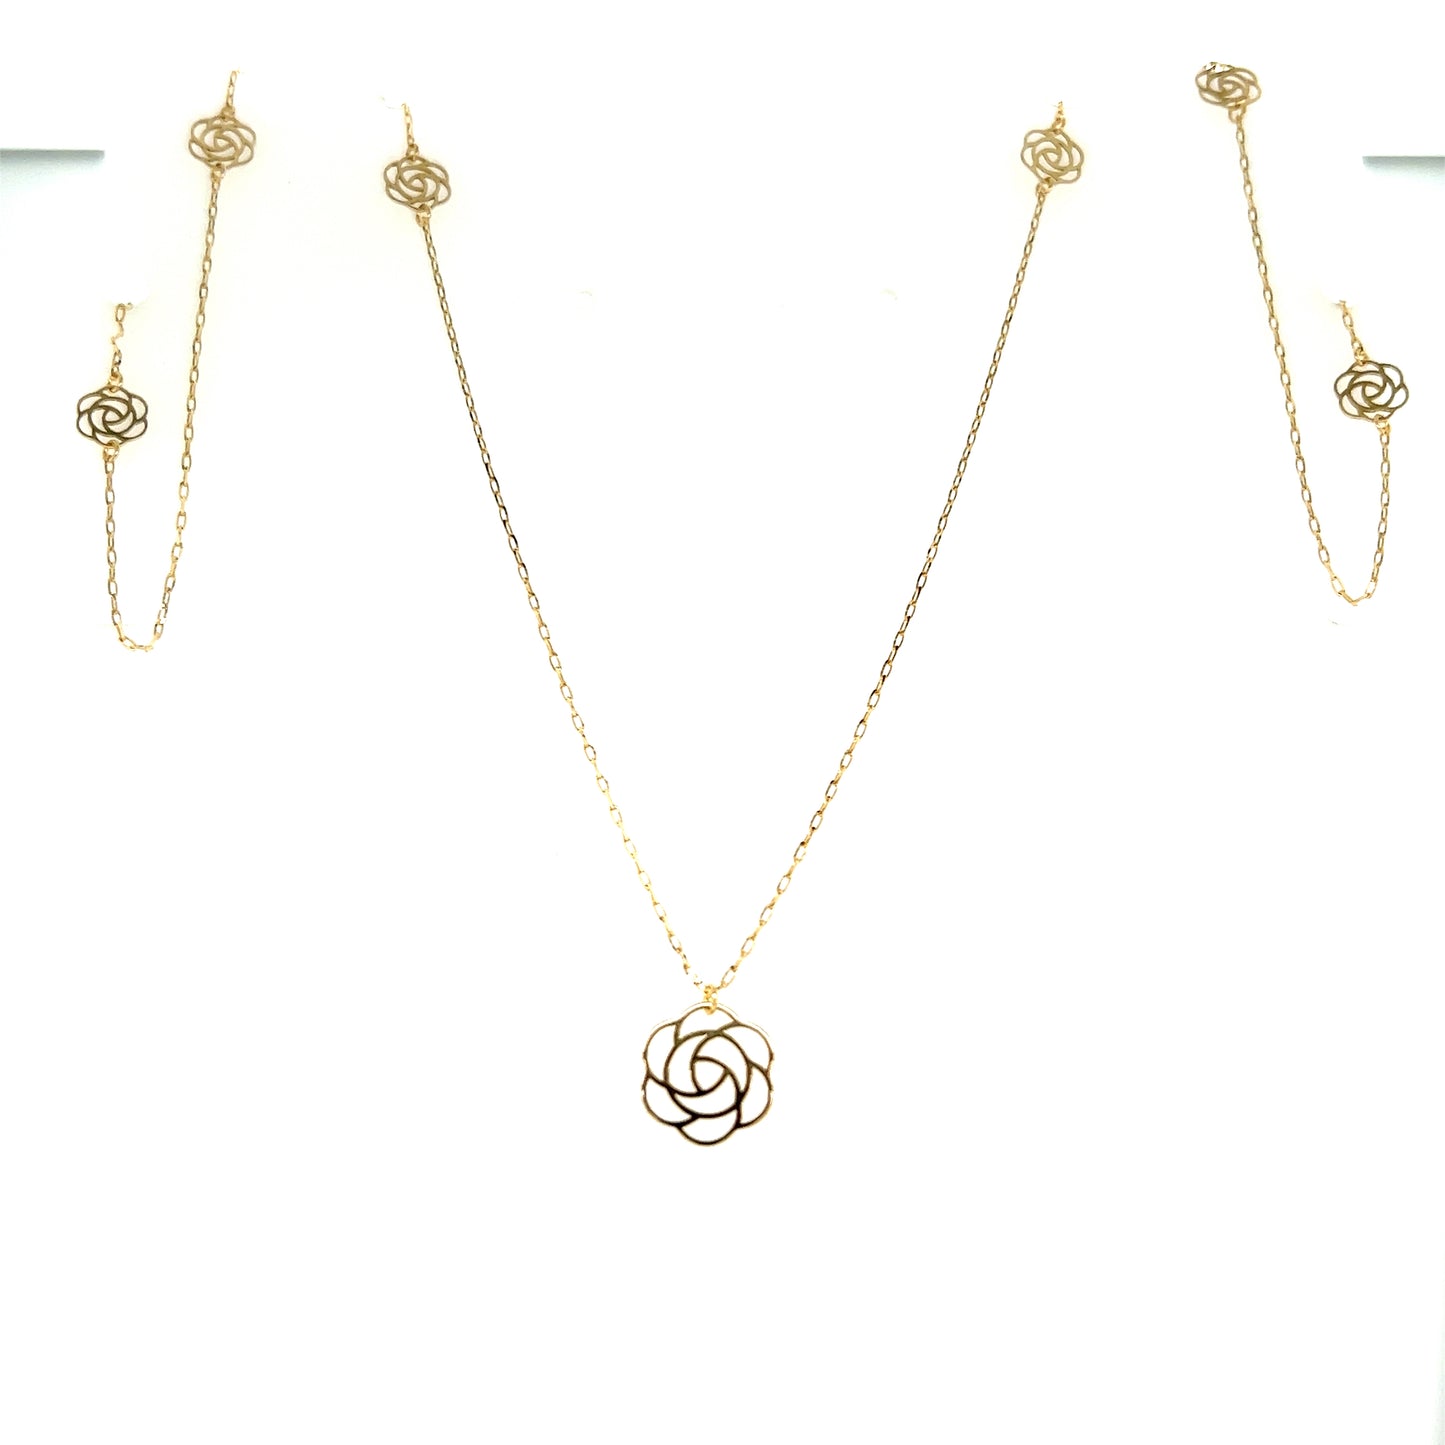 Long type Gold Hollow Flower Necklace